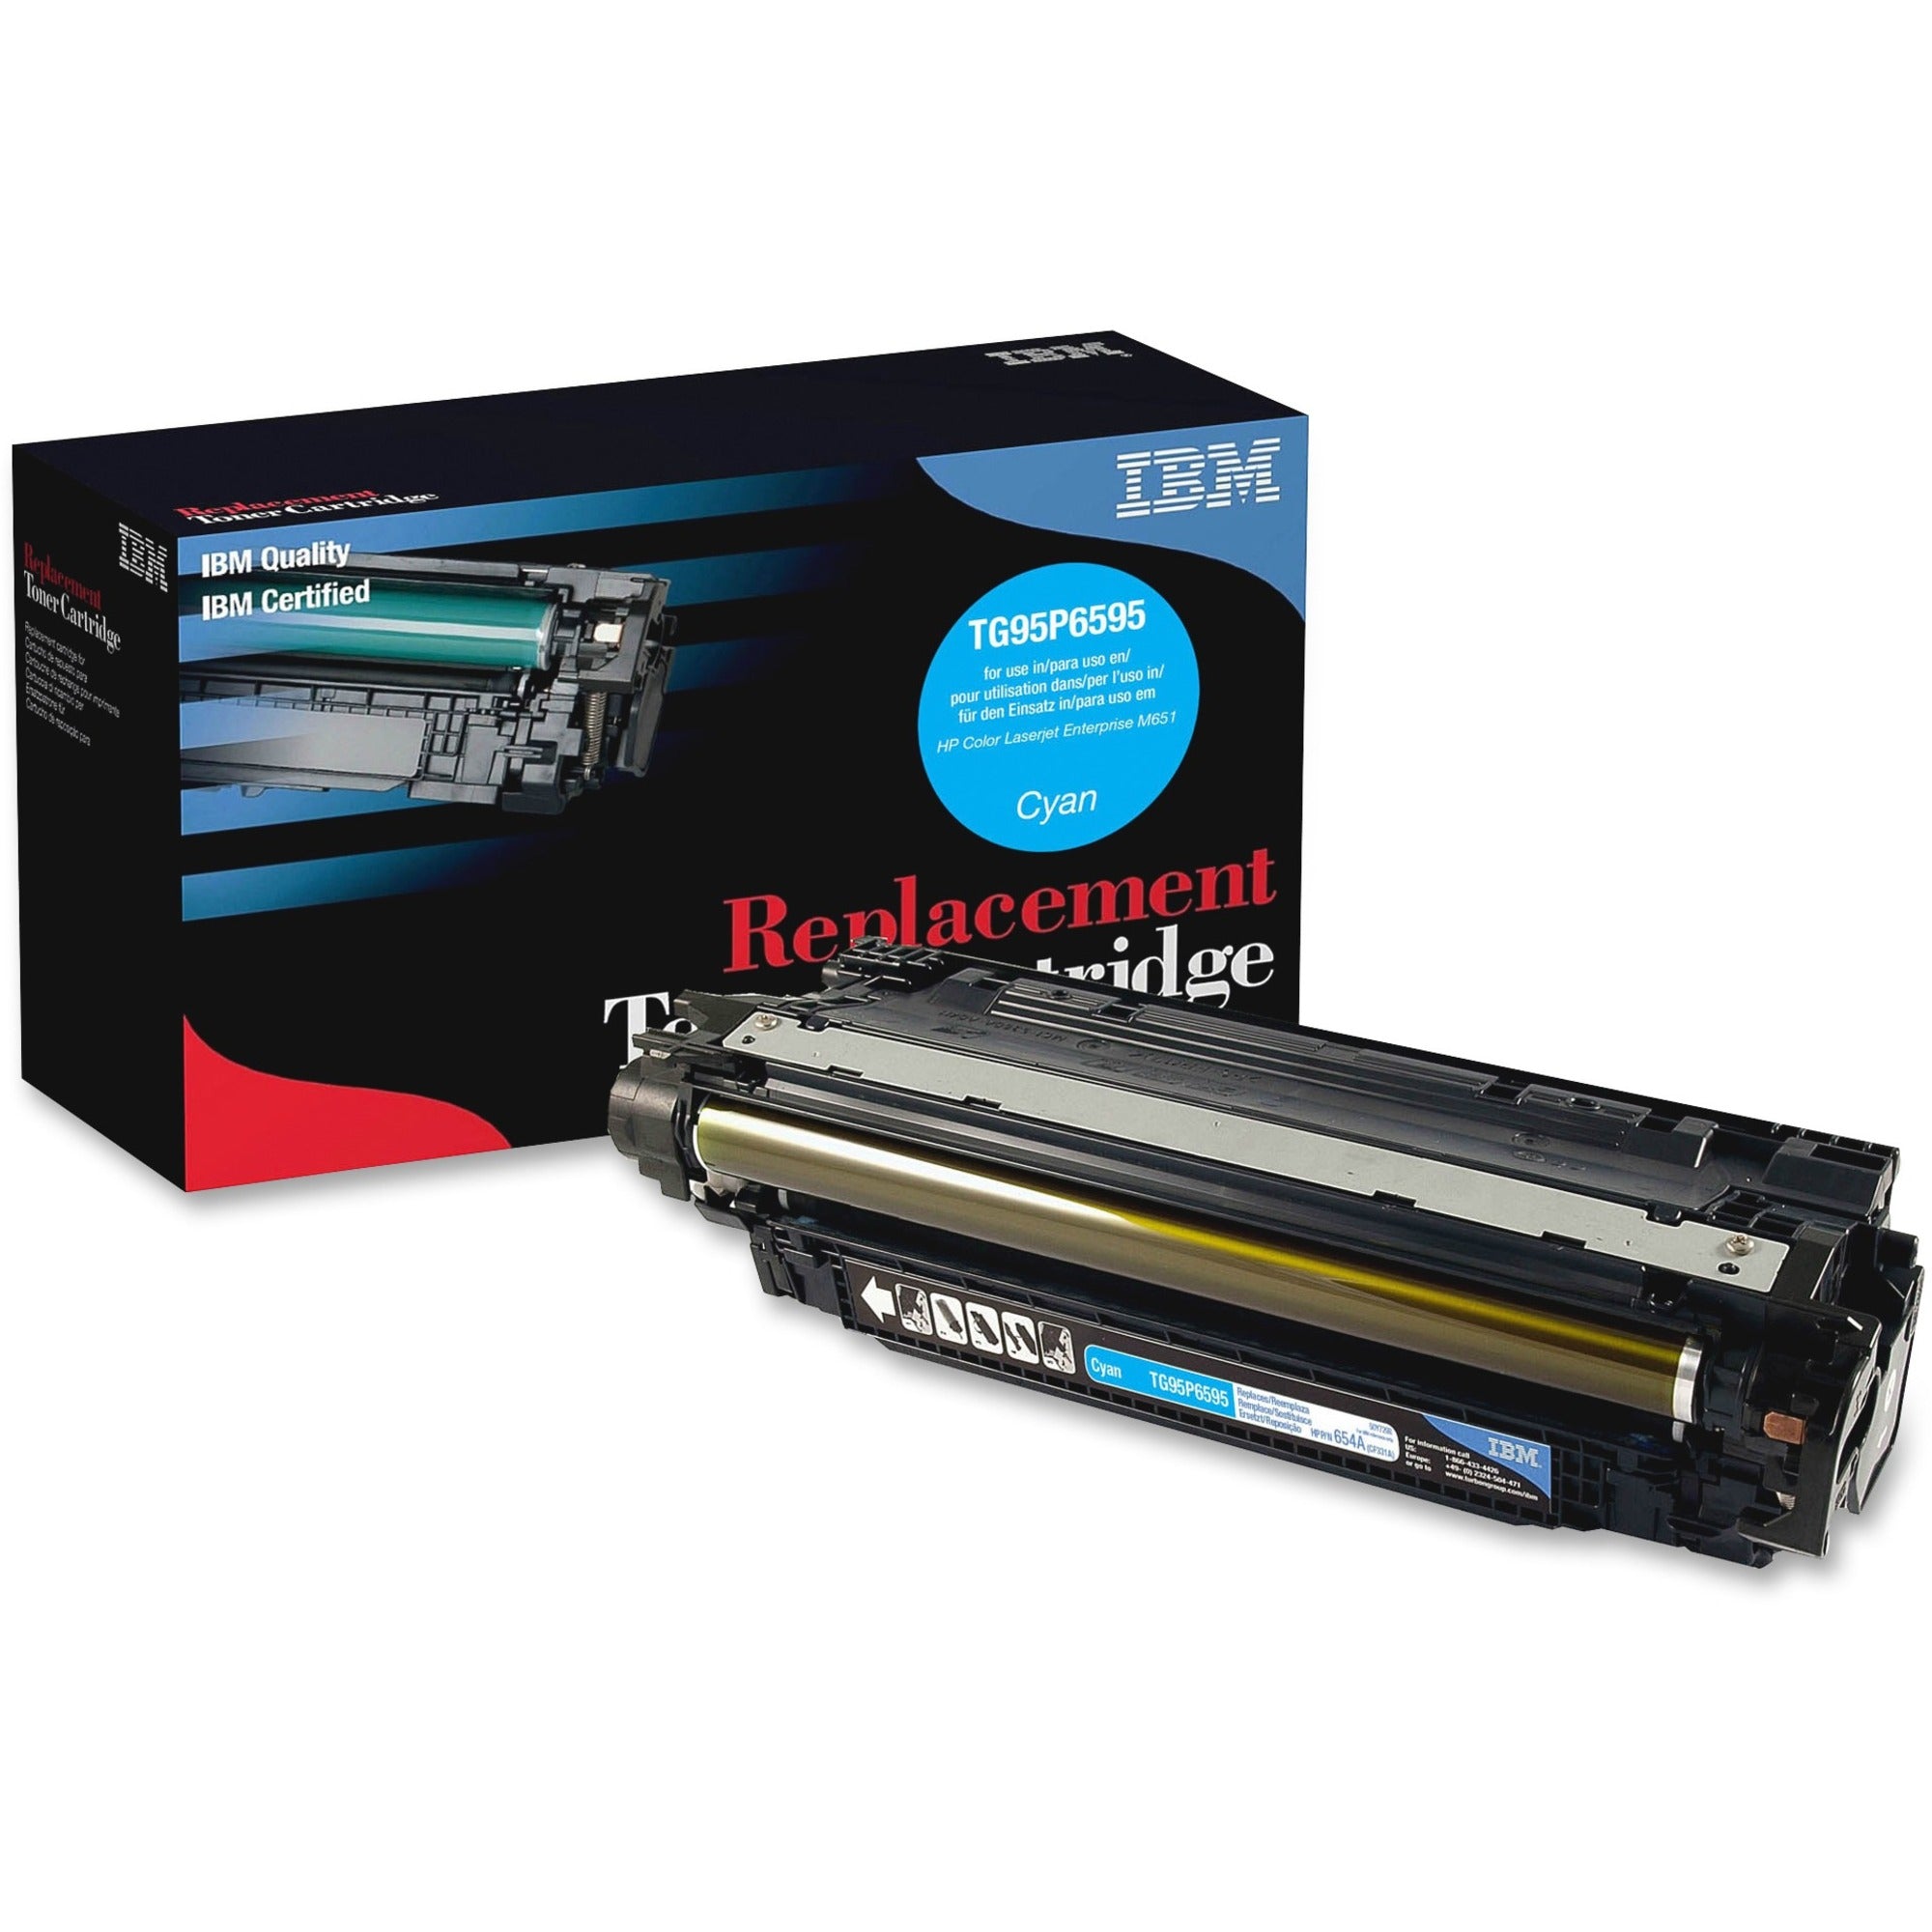 IBM Remanufactured Laser Toner Cartridge - Alternative for HP 654X (CF331A) - Cyan - 1 Each - 15000 Pages - 